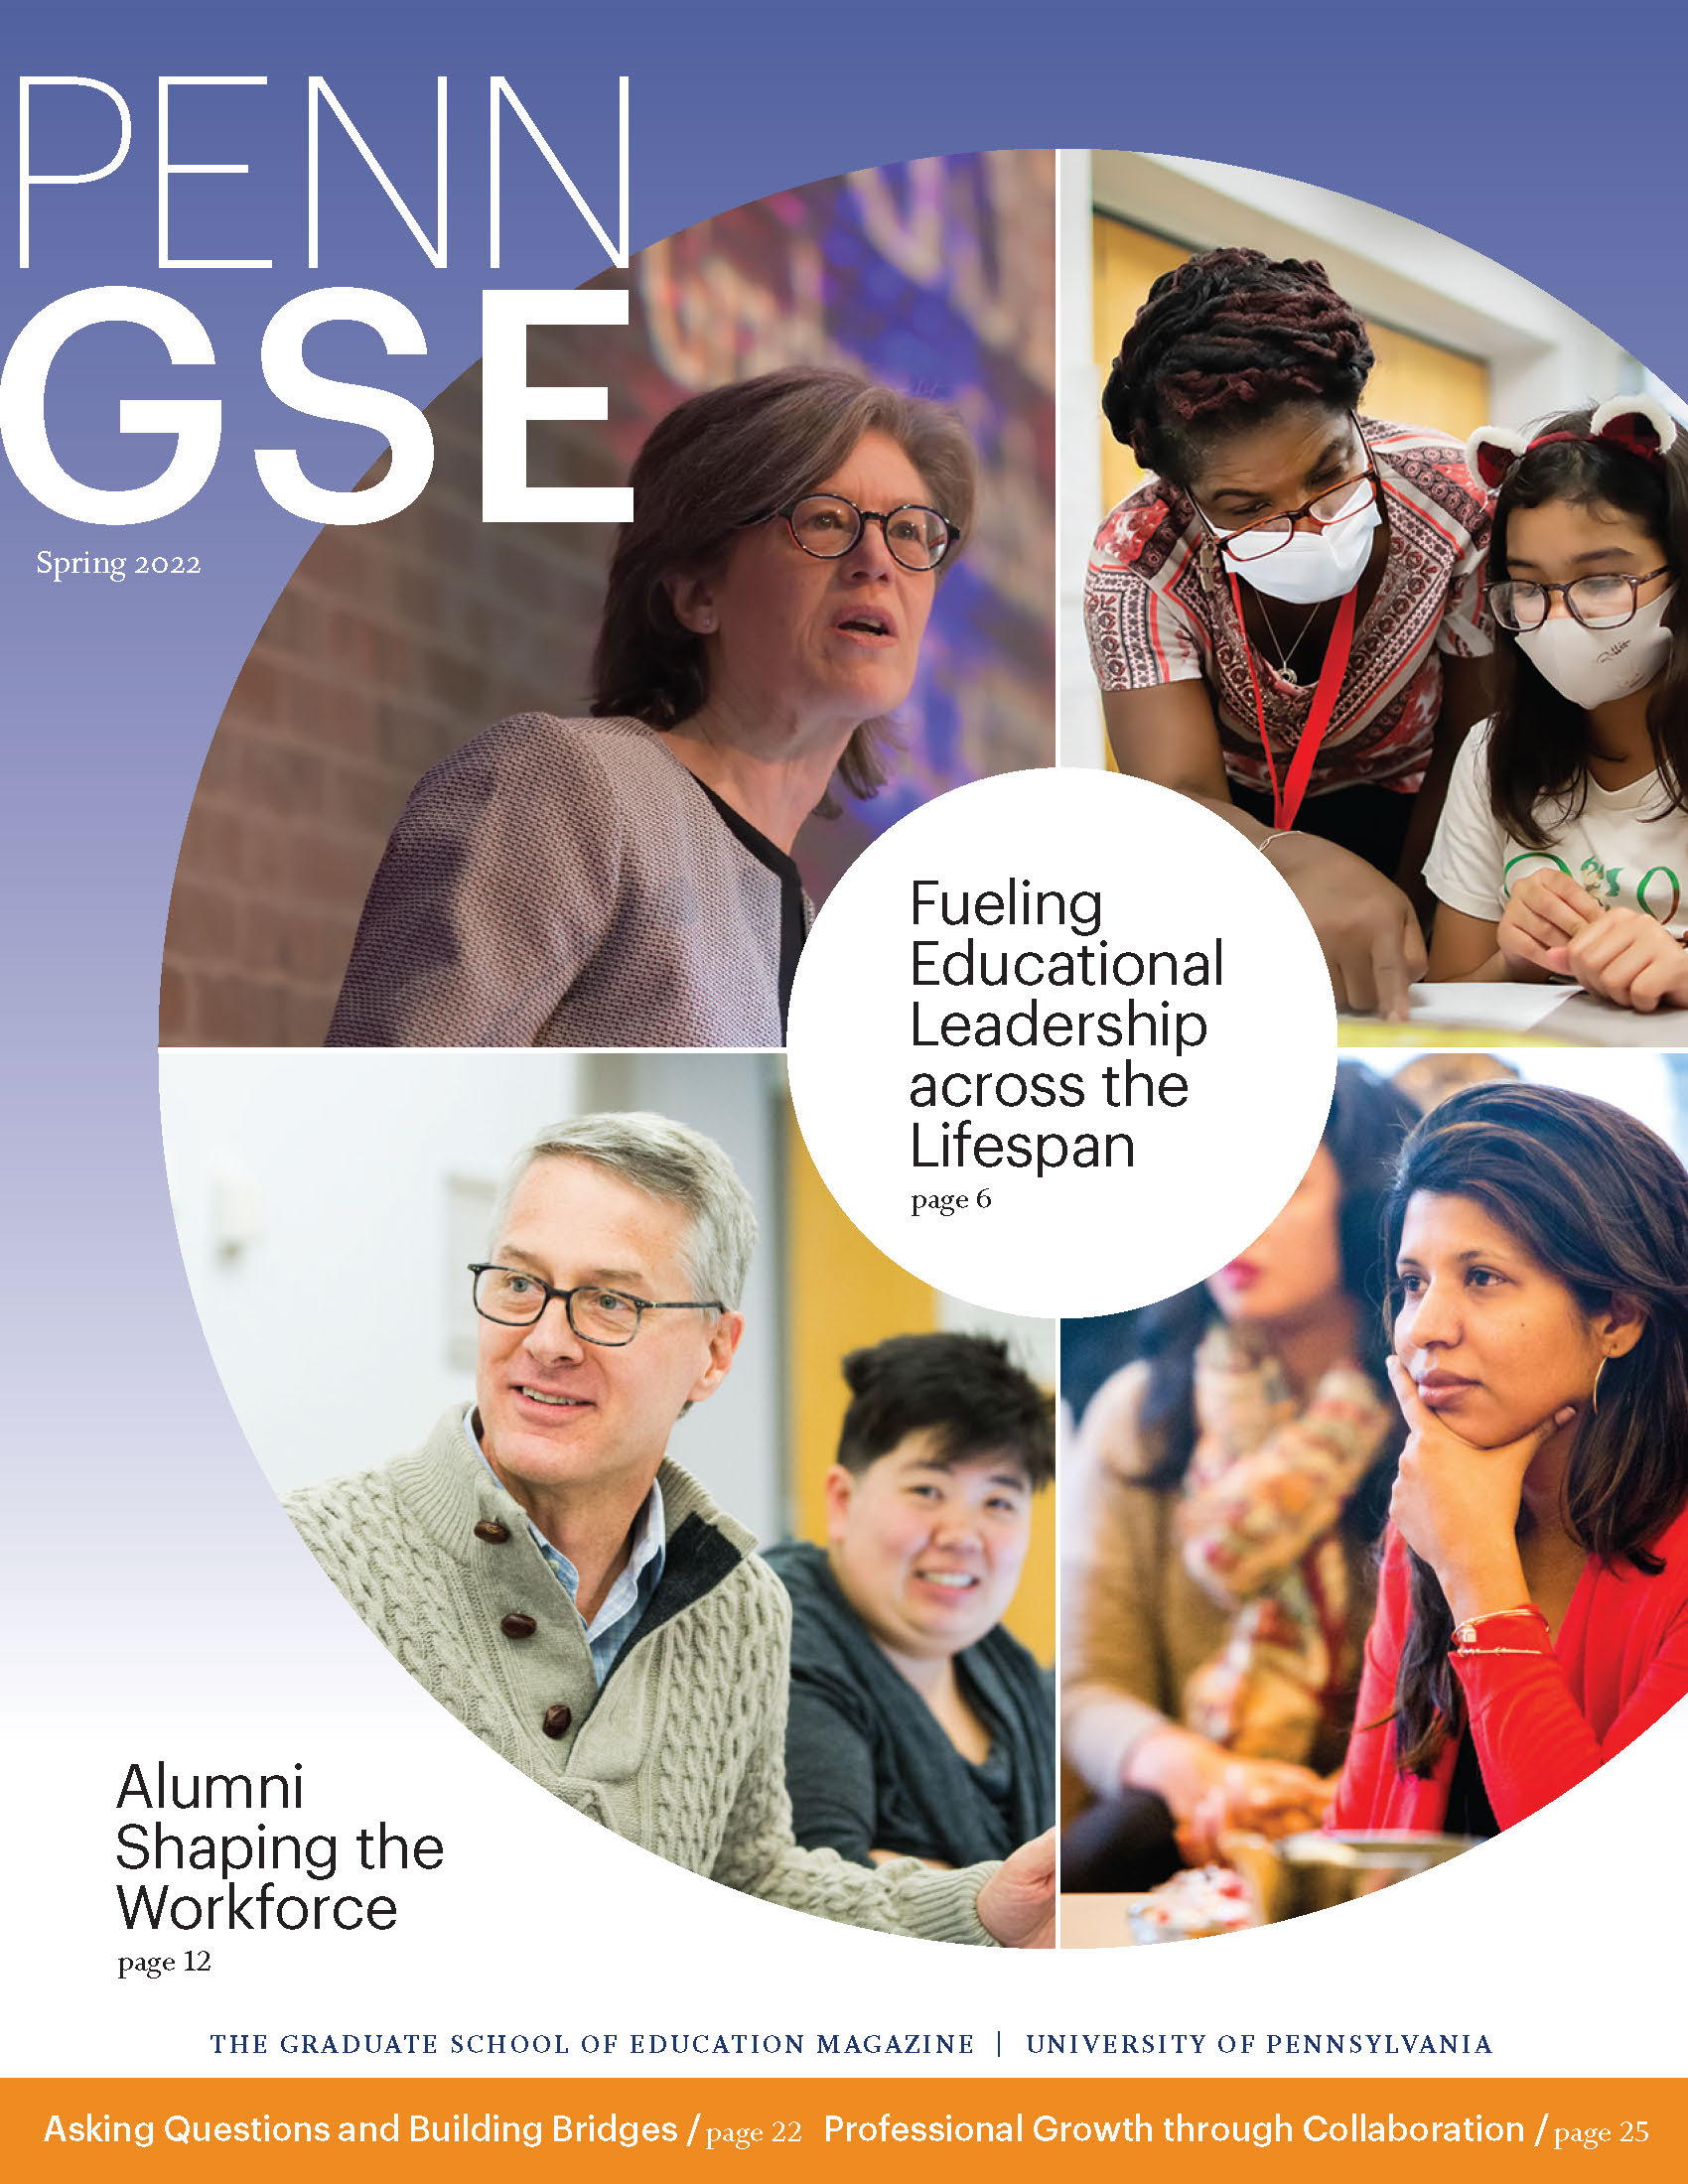 The cover of the Spring 2022 issue of The Penn GSE Magazine. [Alt-tag: The cover of the Spring 2022 issue of The Penn GSE Magazine. A disc with four images of educators and students has the title “Fueling Educational Leadership Across The Lifespan” in the center. Other headlines read “Alumni Shaping the Workforce,” “Asking Questions and Building Bridges,” and “Professional Growth through Collaboration.”